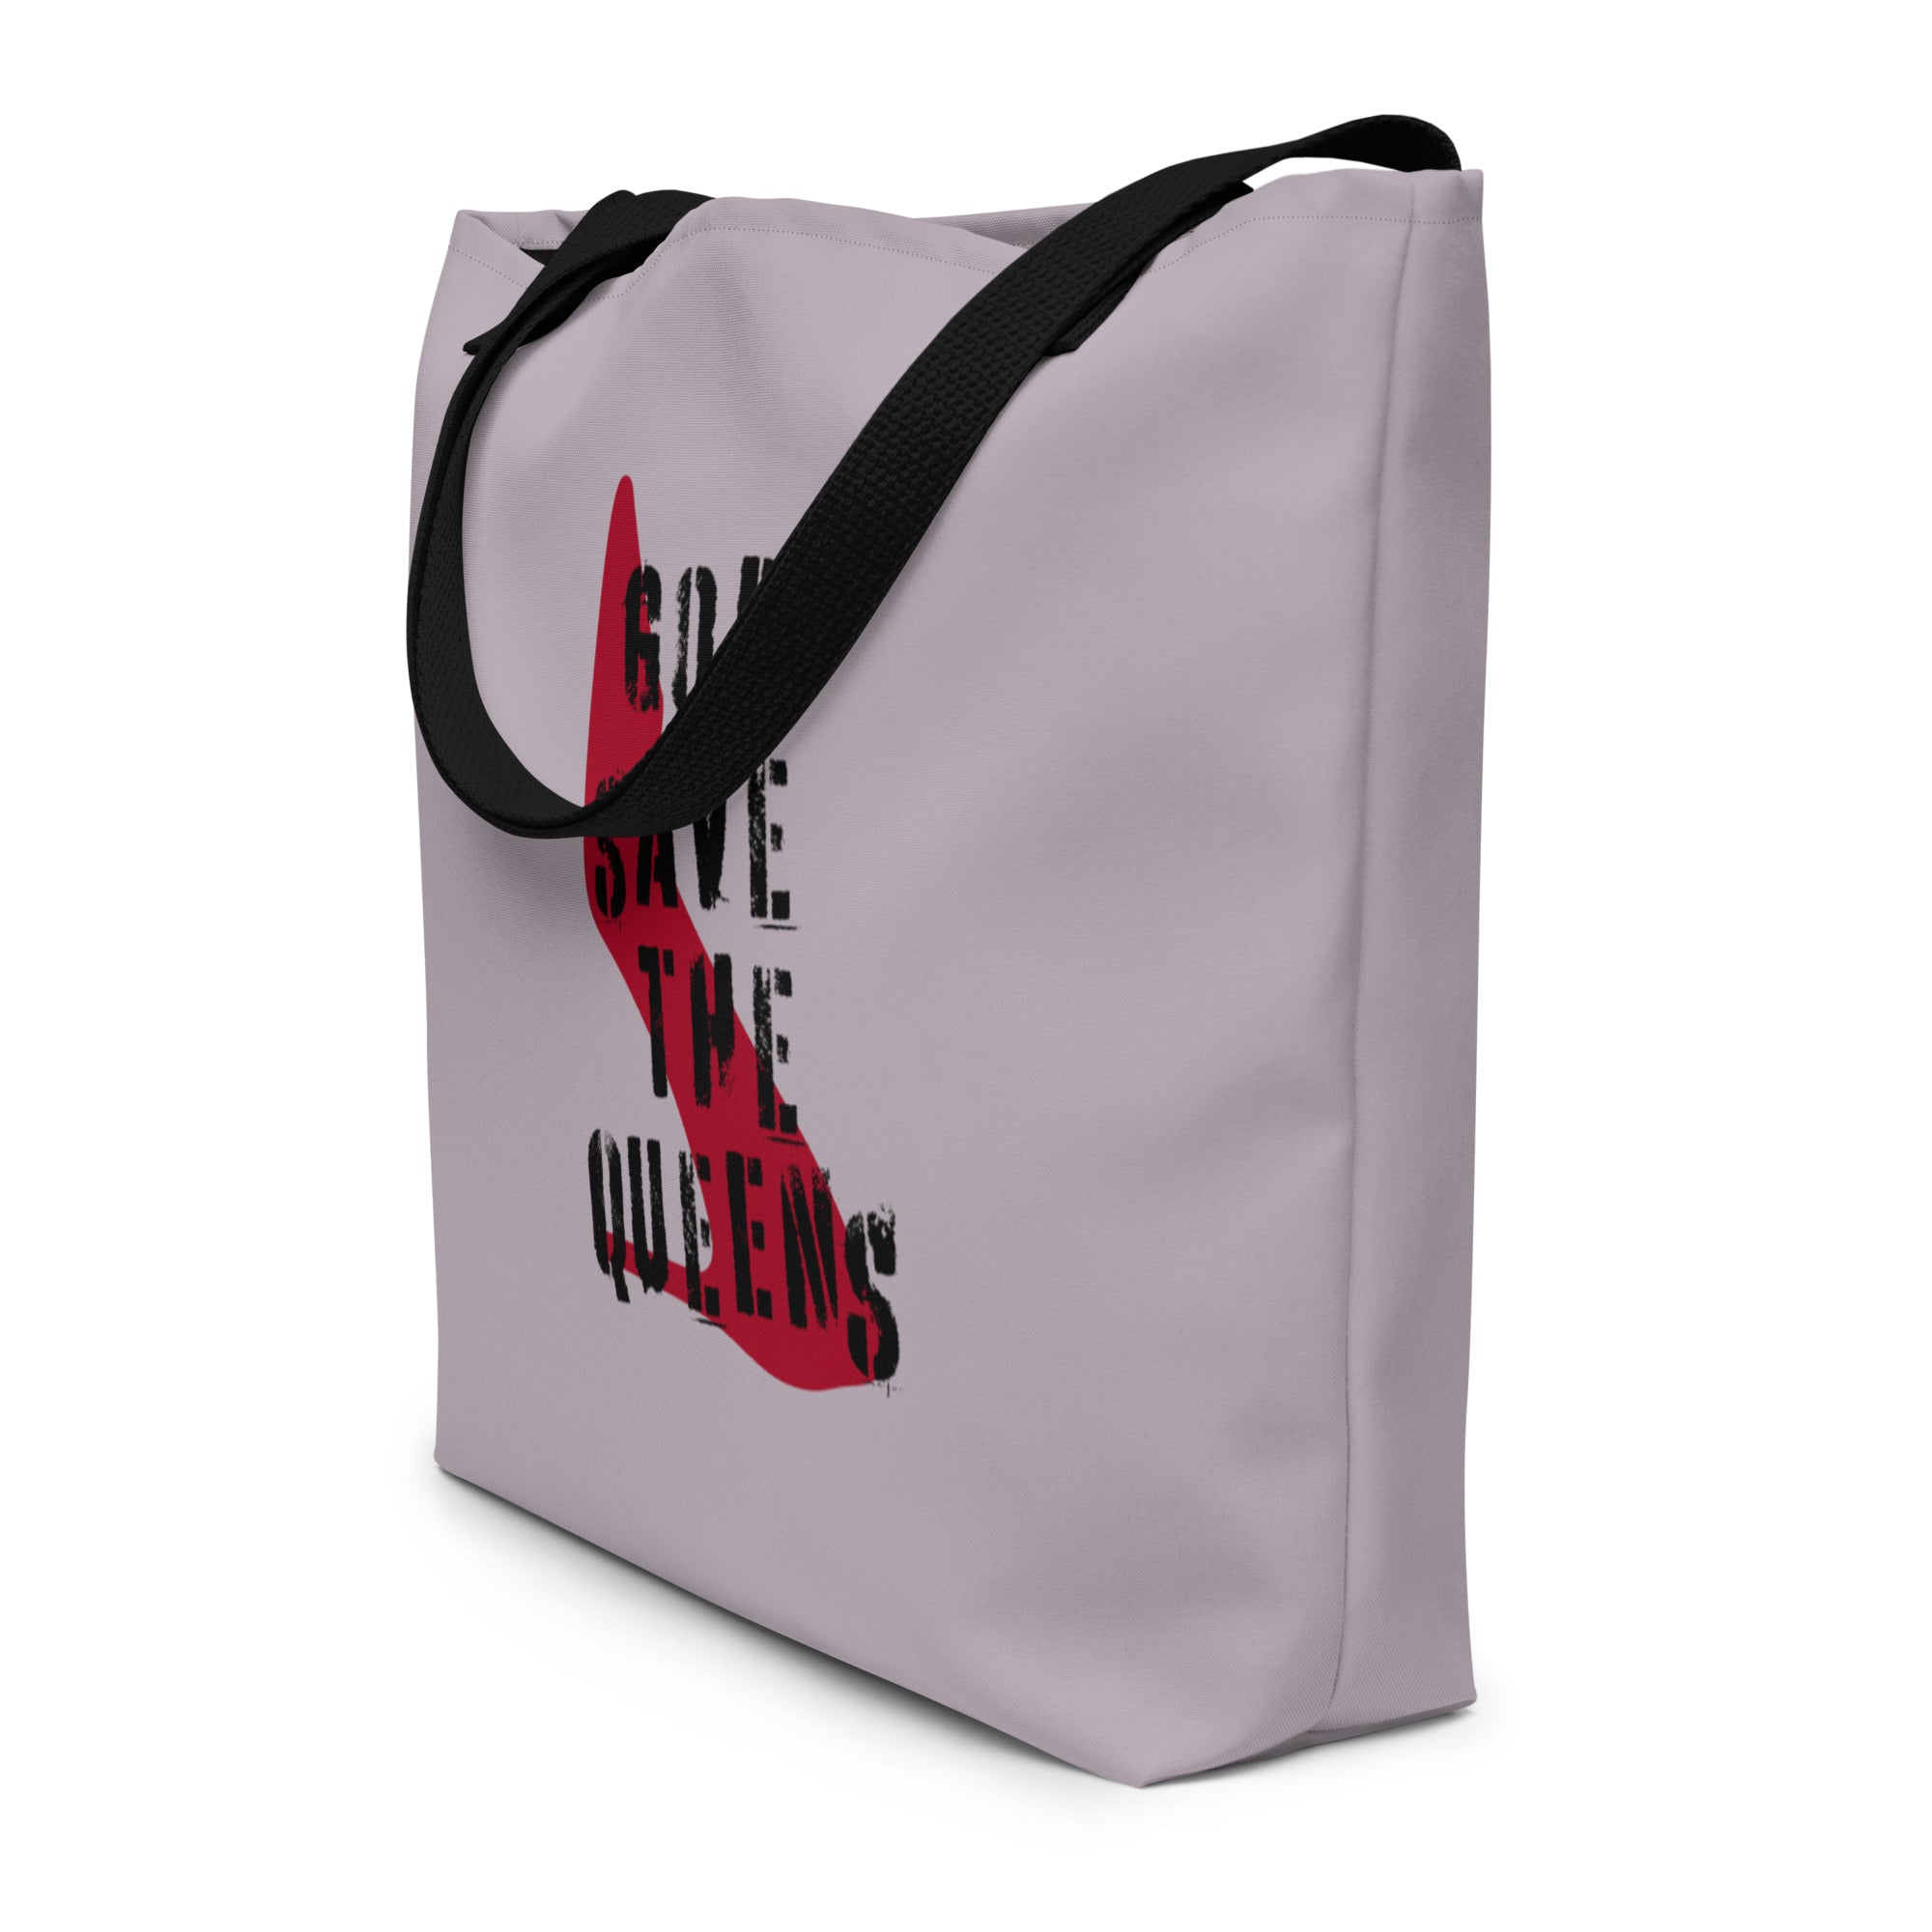 God Save The Queens Royal Merchandise Bag - Lily